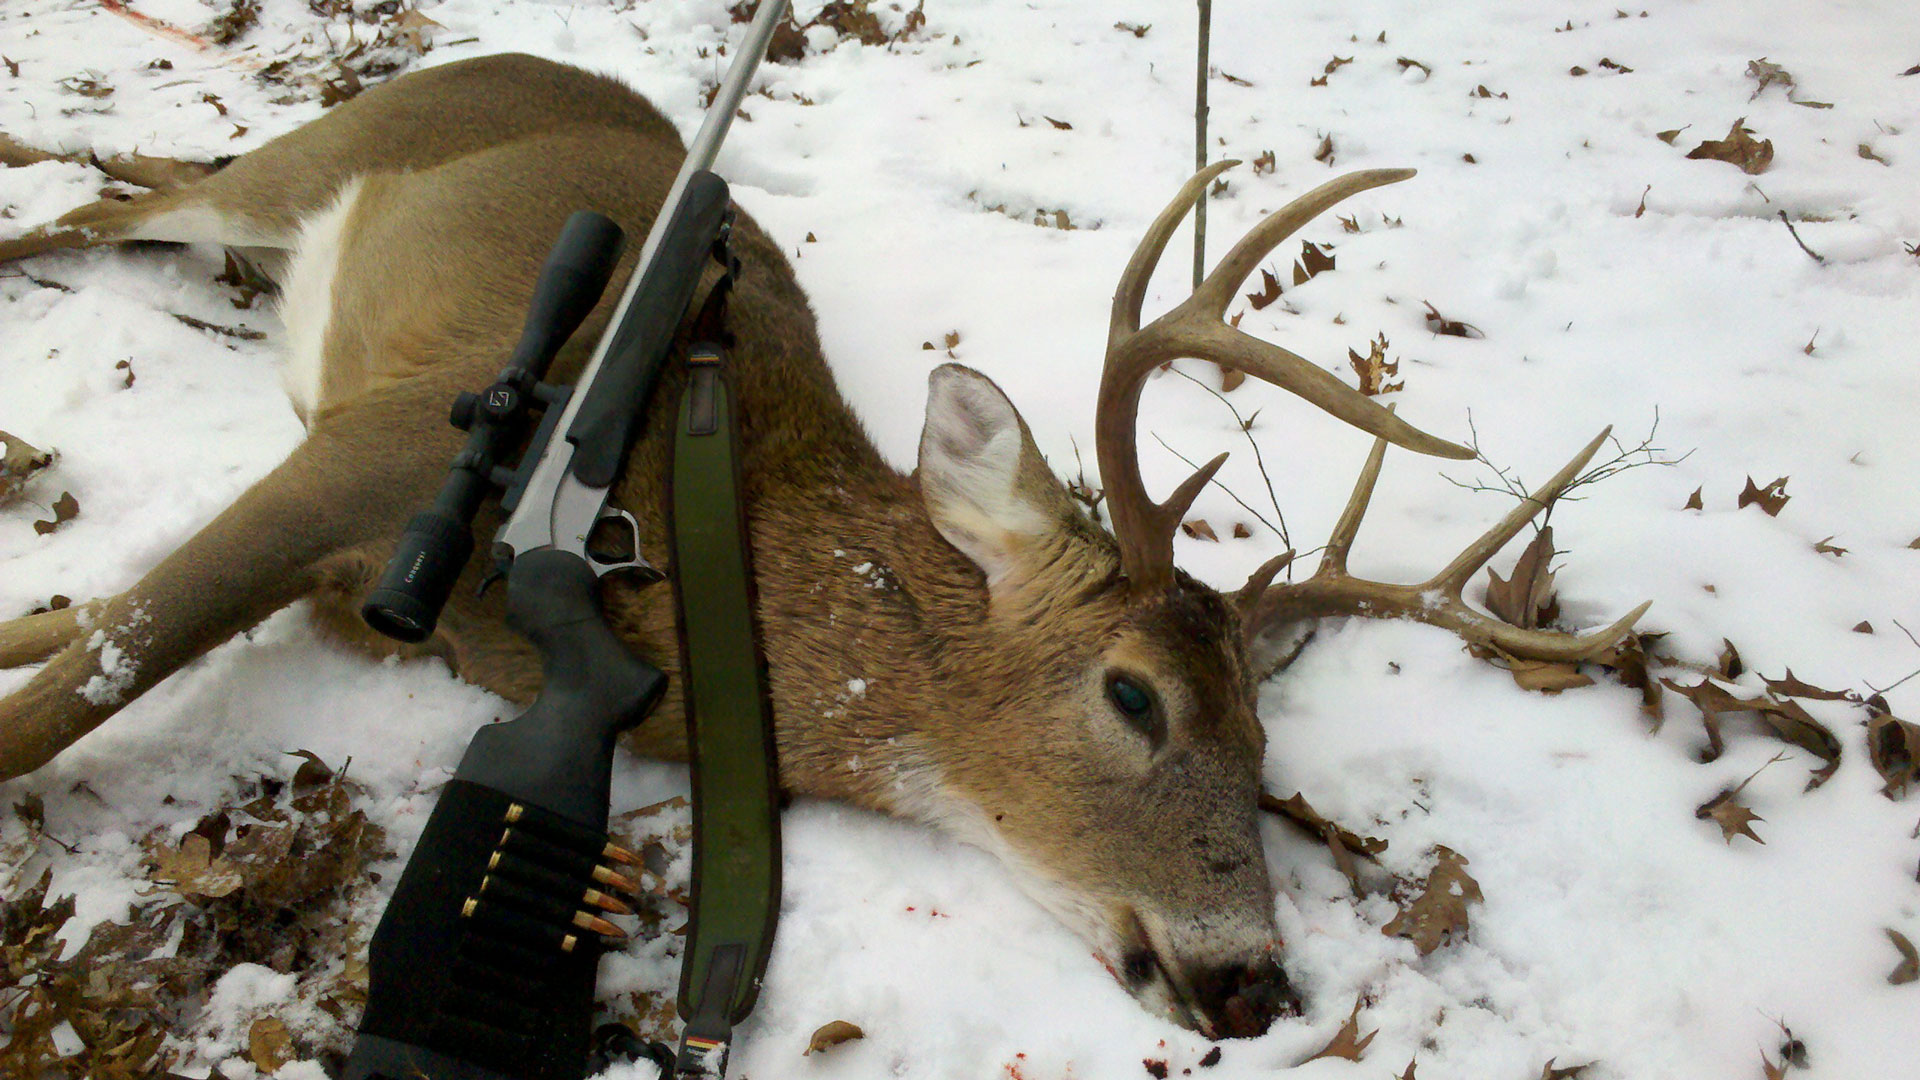 Whitetail buck shot with a 35 Whelen 225 GameKing. Rifle leaned on him.